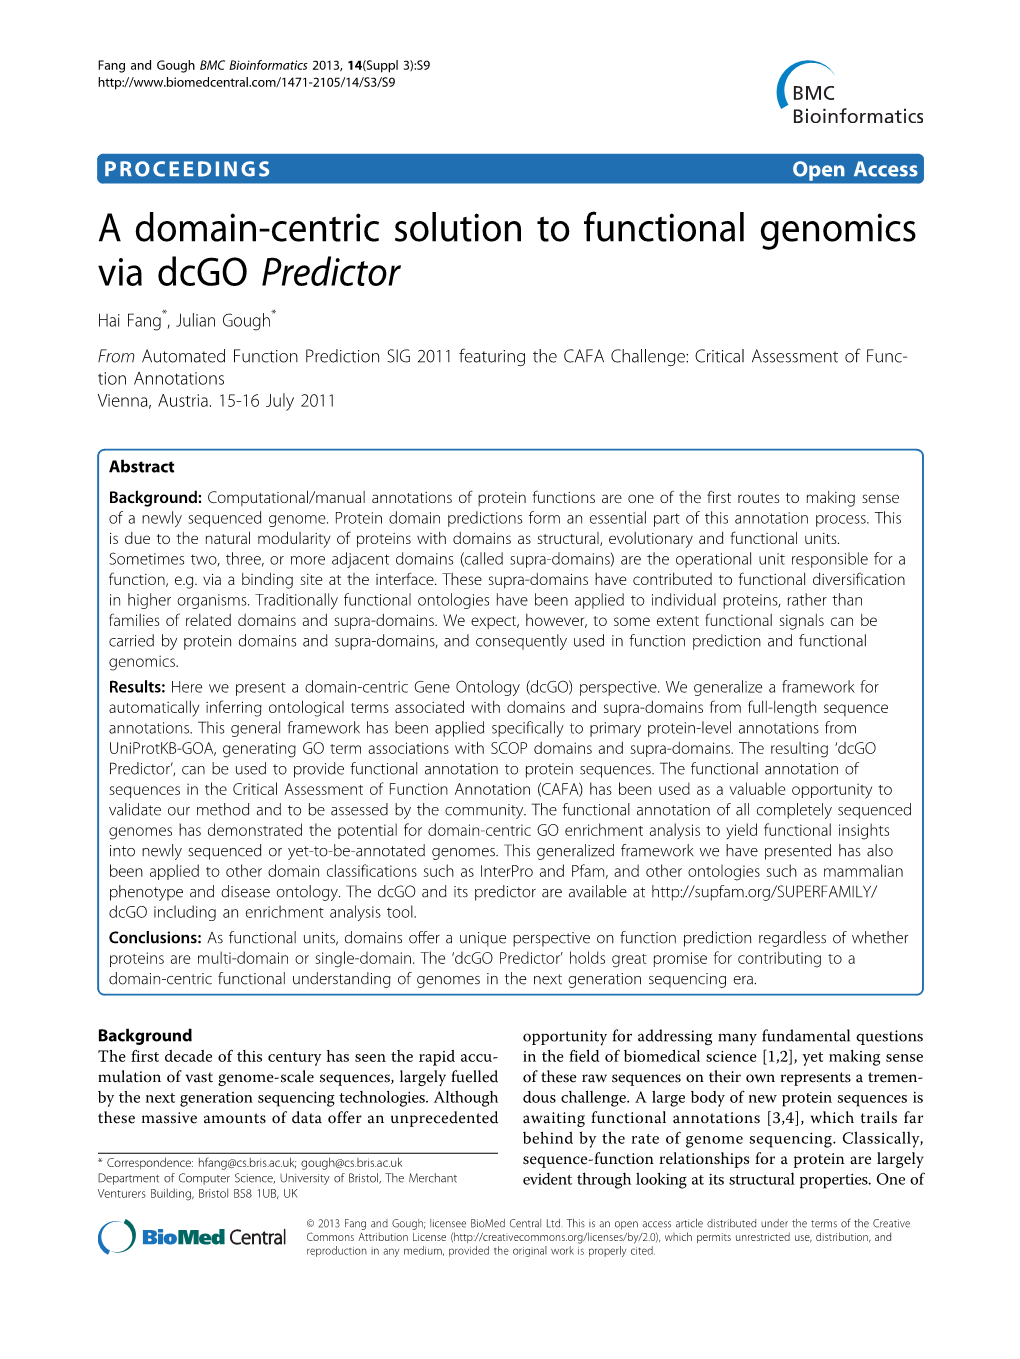 A Domain-Centric Solution to Functional Genomics Via Dcgo Predictor